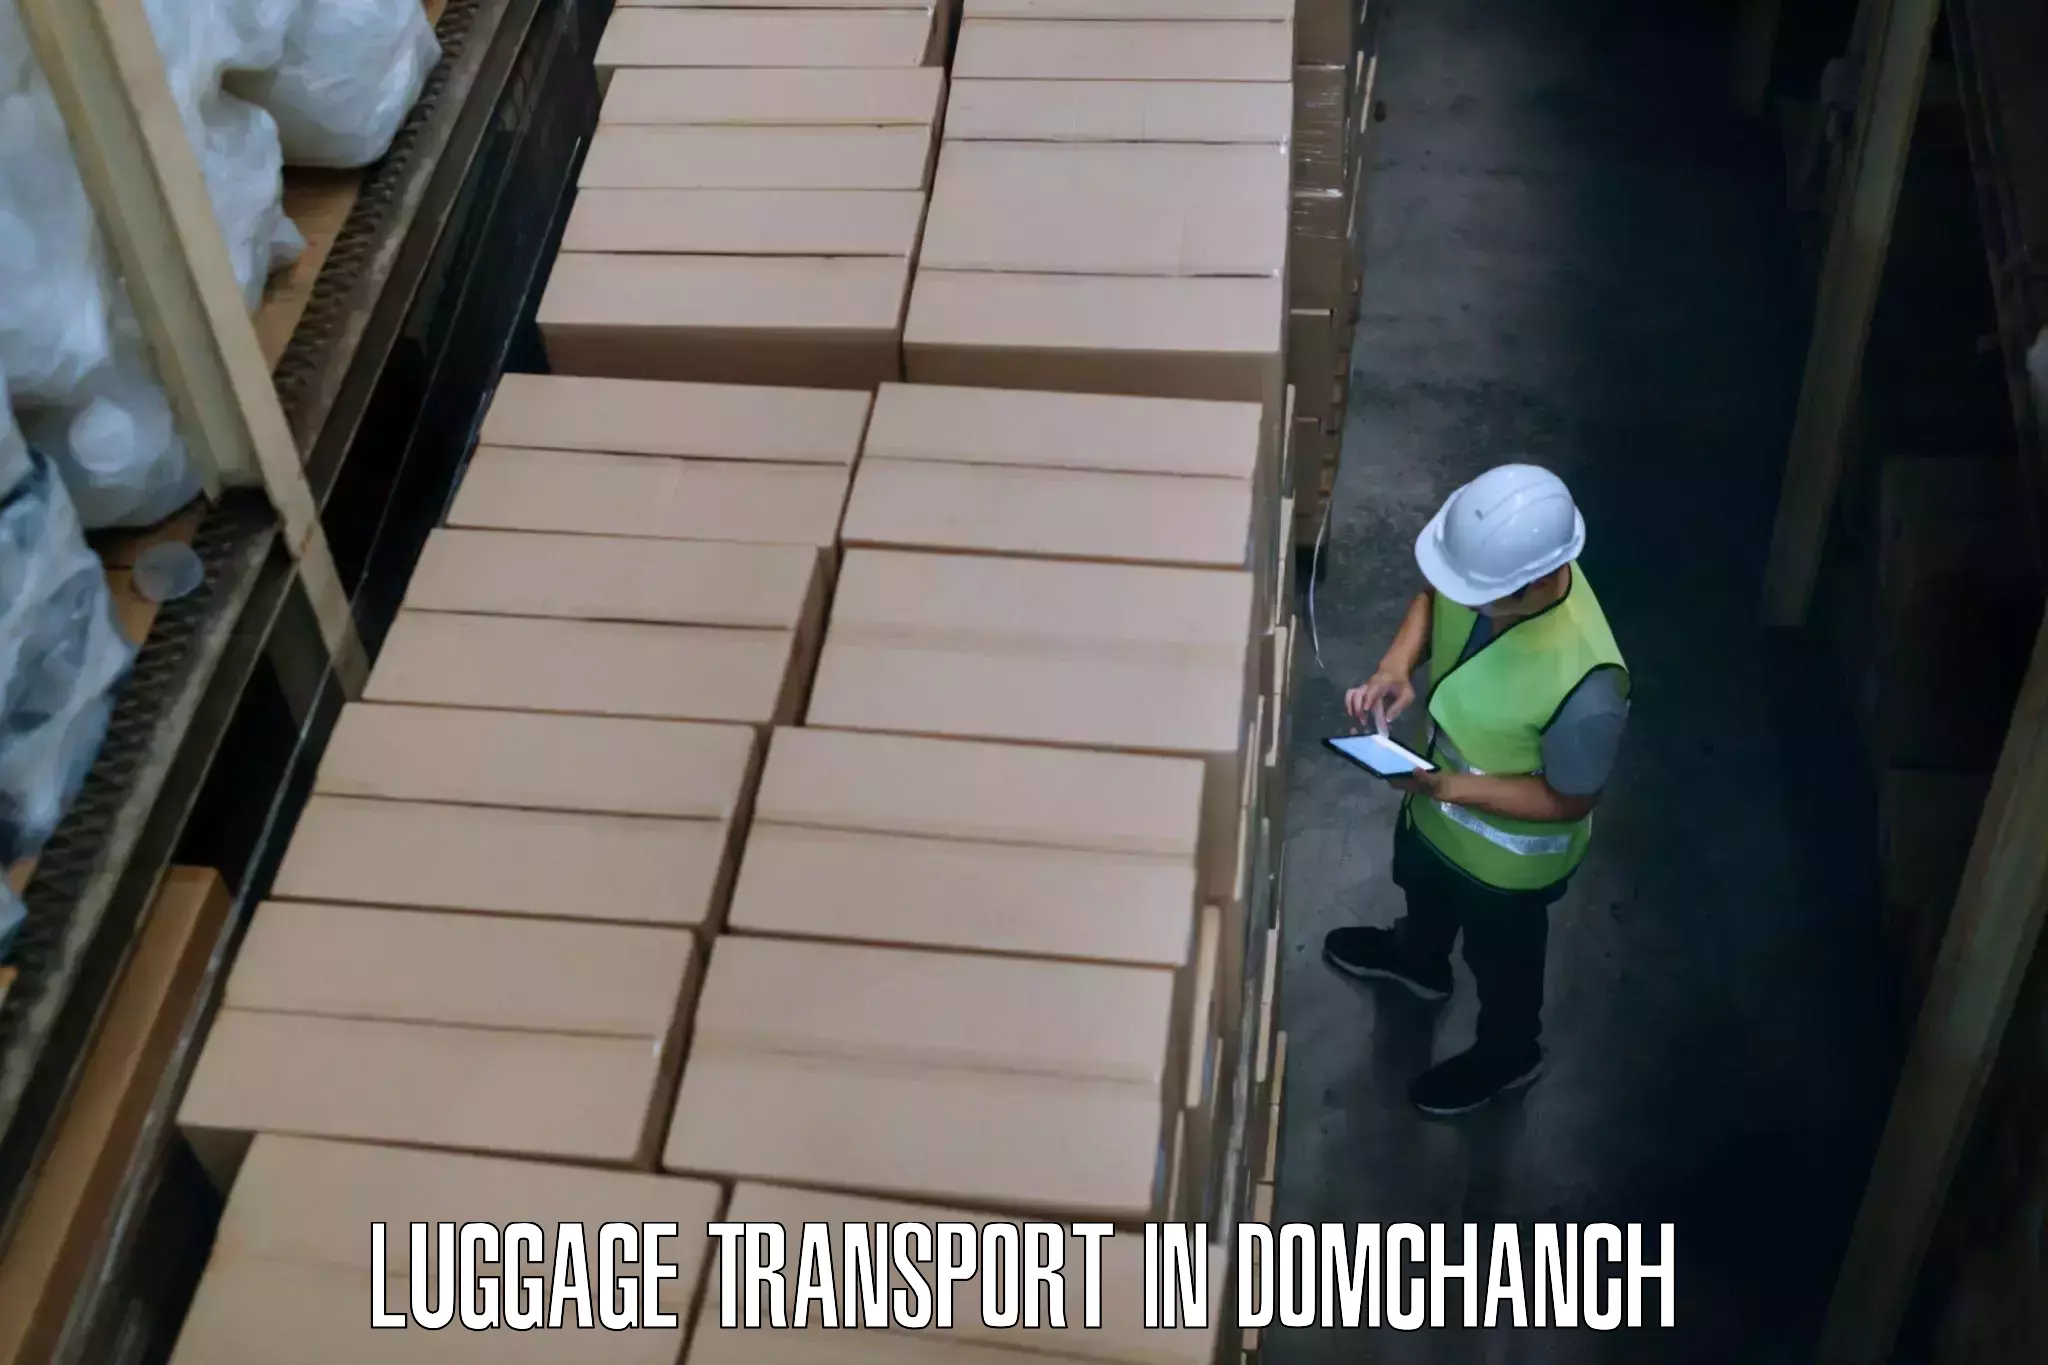 Overnight baggage shipping in Domchanch